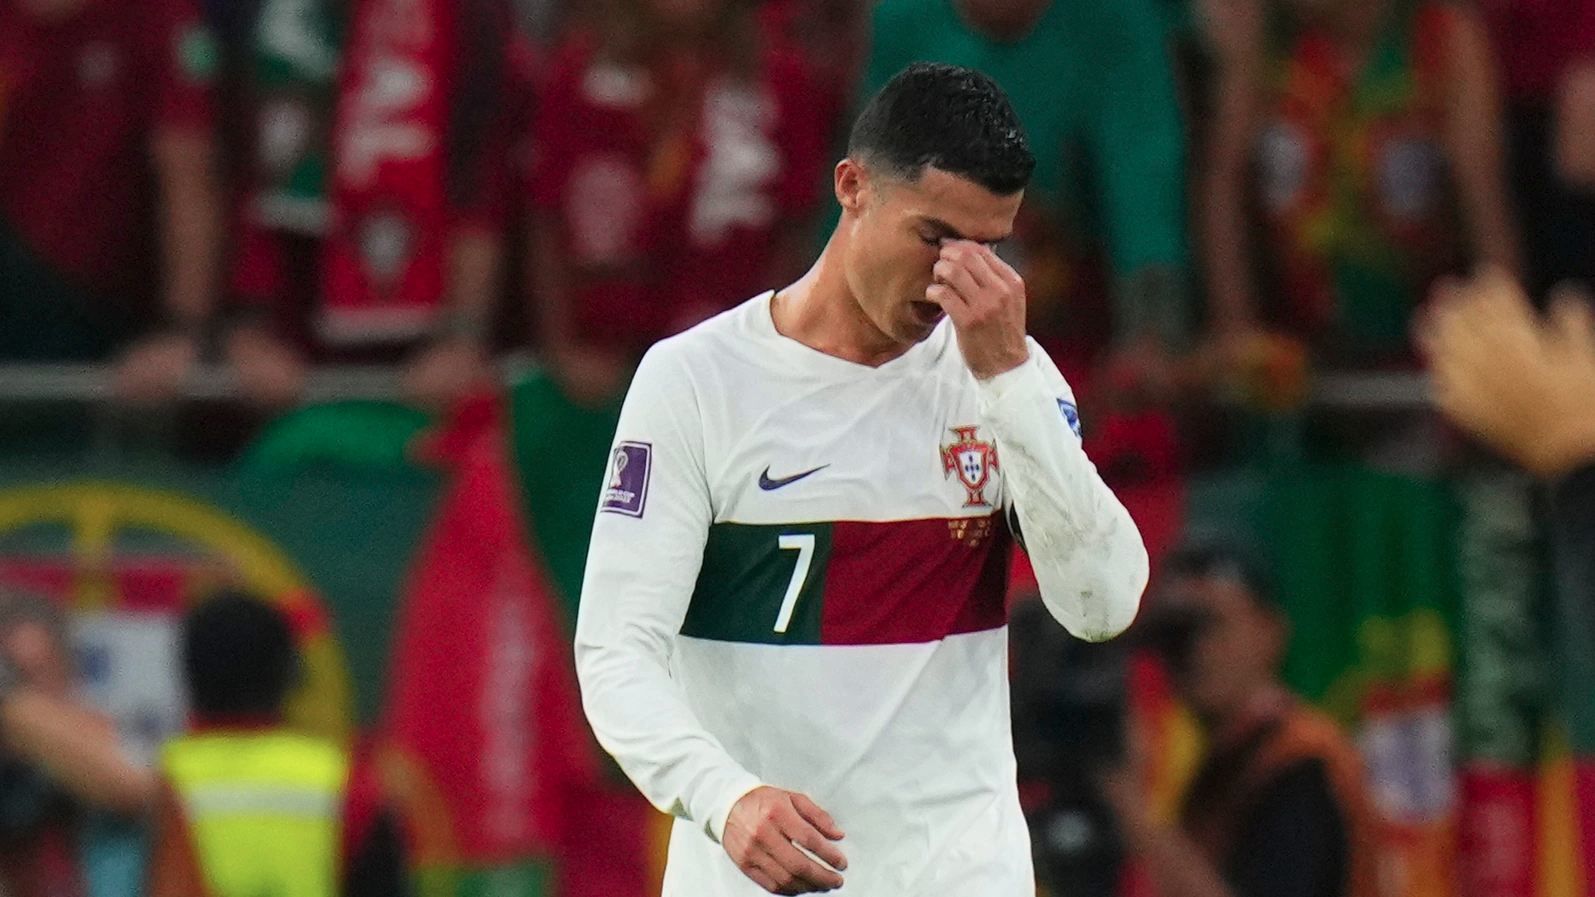 Ronaldo cries after Portugal's exit from the 2022 World Cup